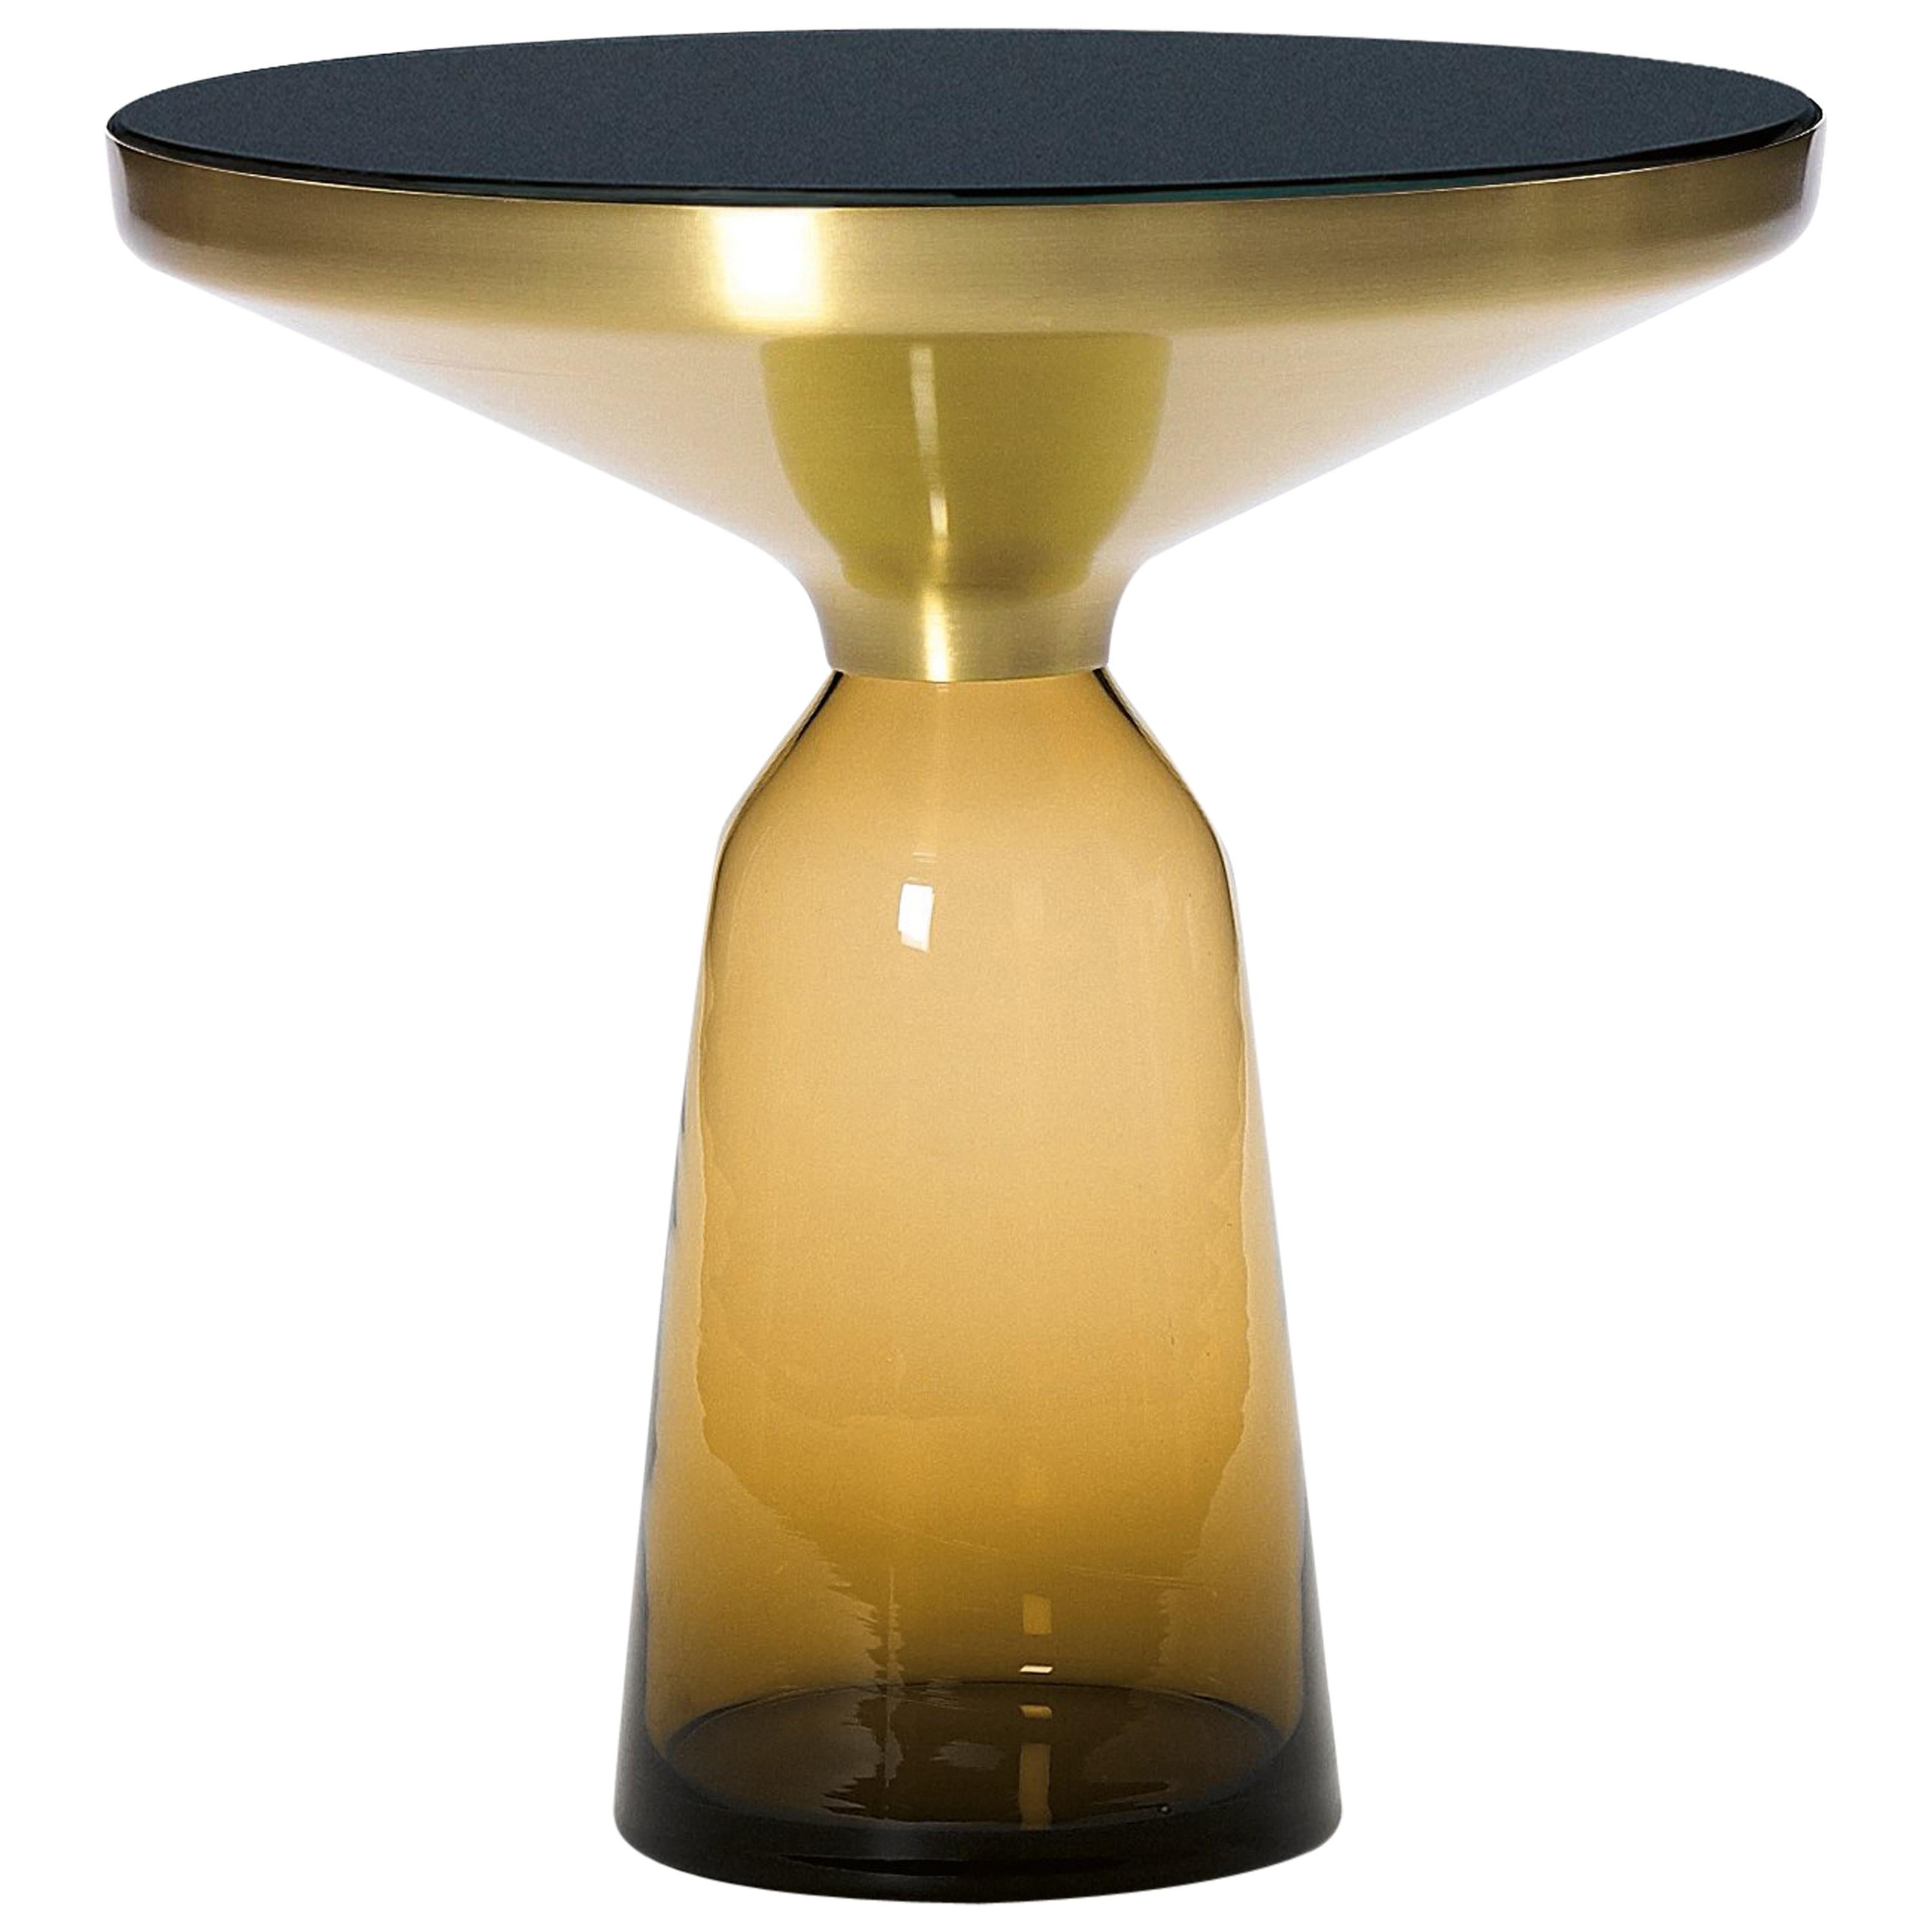 ClassiCon Bell Side Table in Brass and Amber Orange by Sebastian Herkner